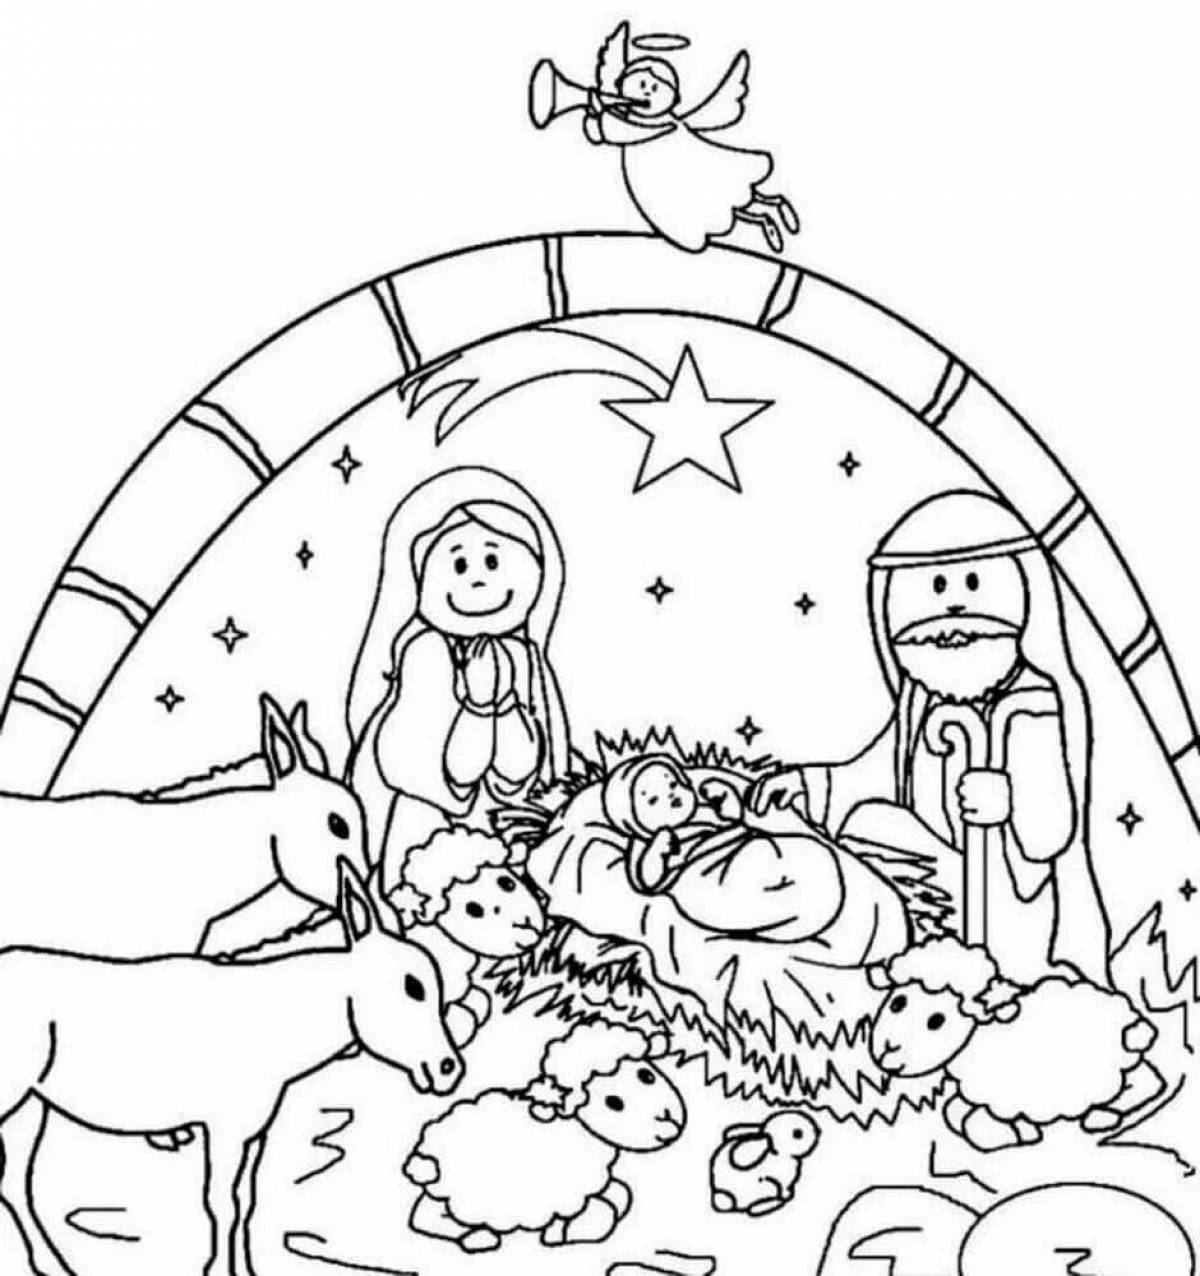 Merry Christmas coloring pages for 3-4 year olds